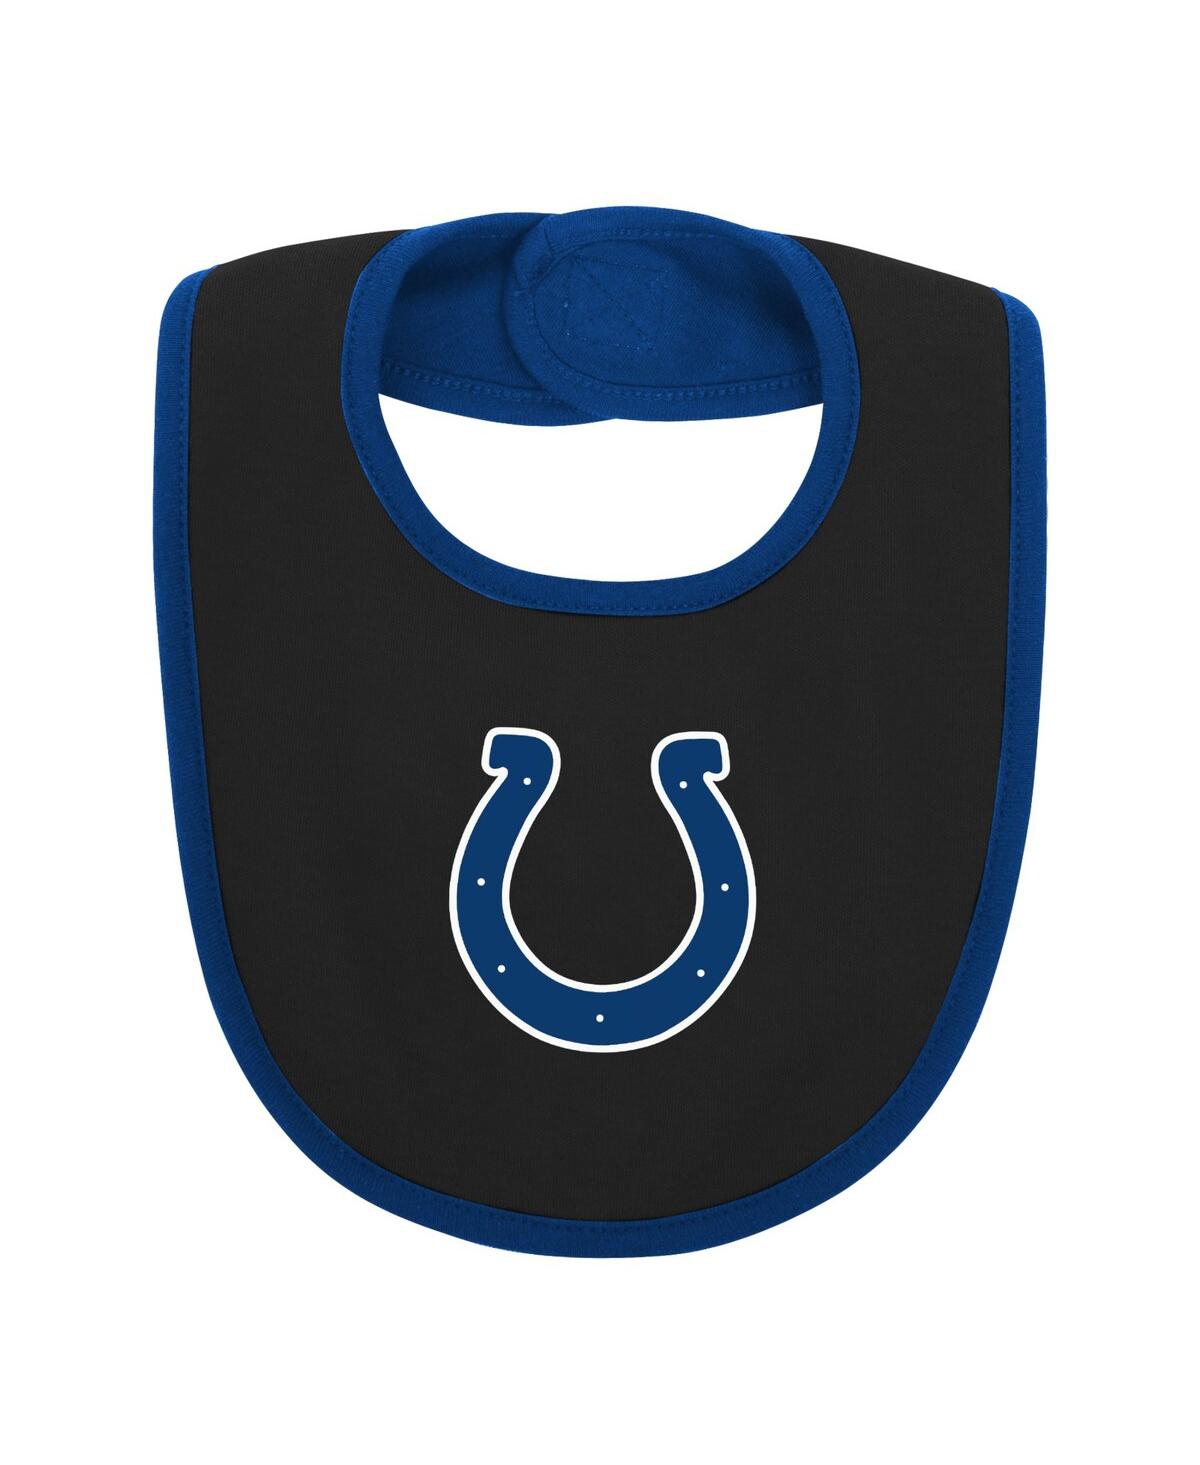 Shop Outerstuff Baby Boys And Girls Royal, Black Indianapolis Colts Home Field Advantage Three-piece Bodysuit, Bib A In Royal,black